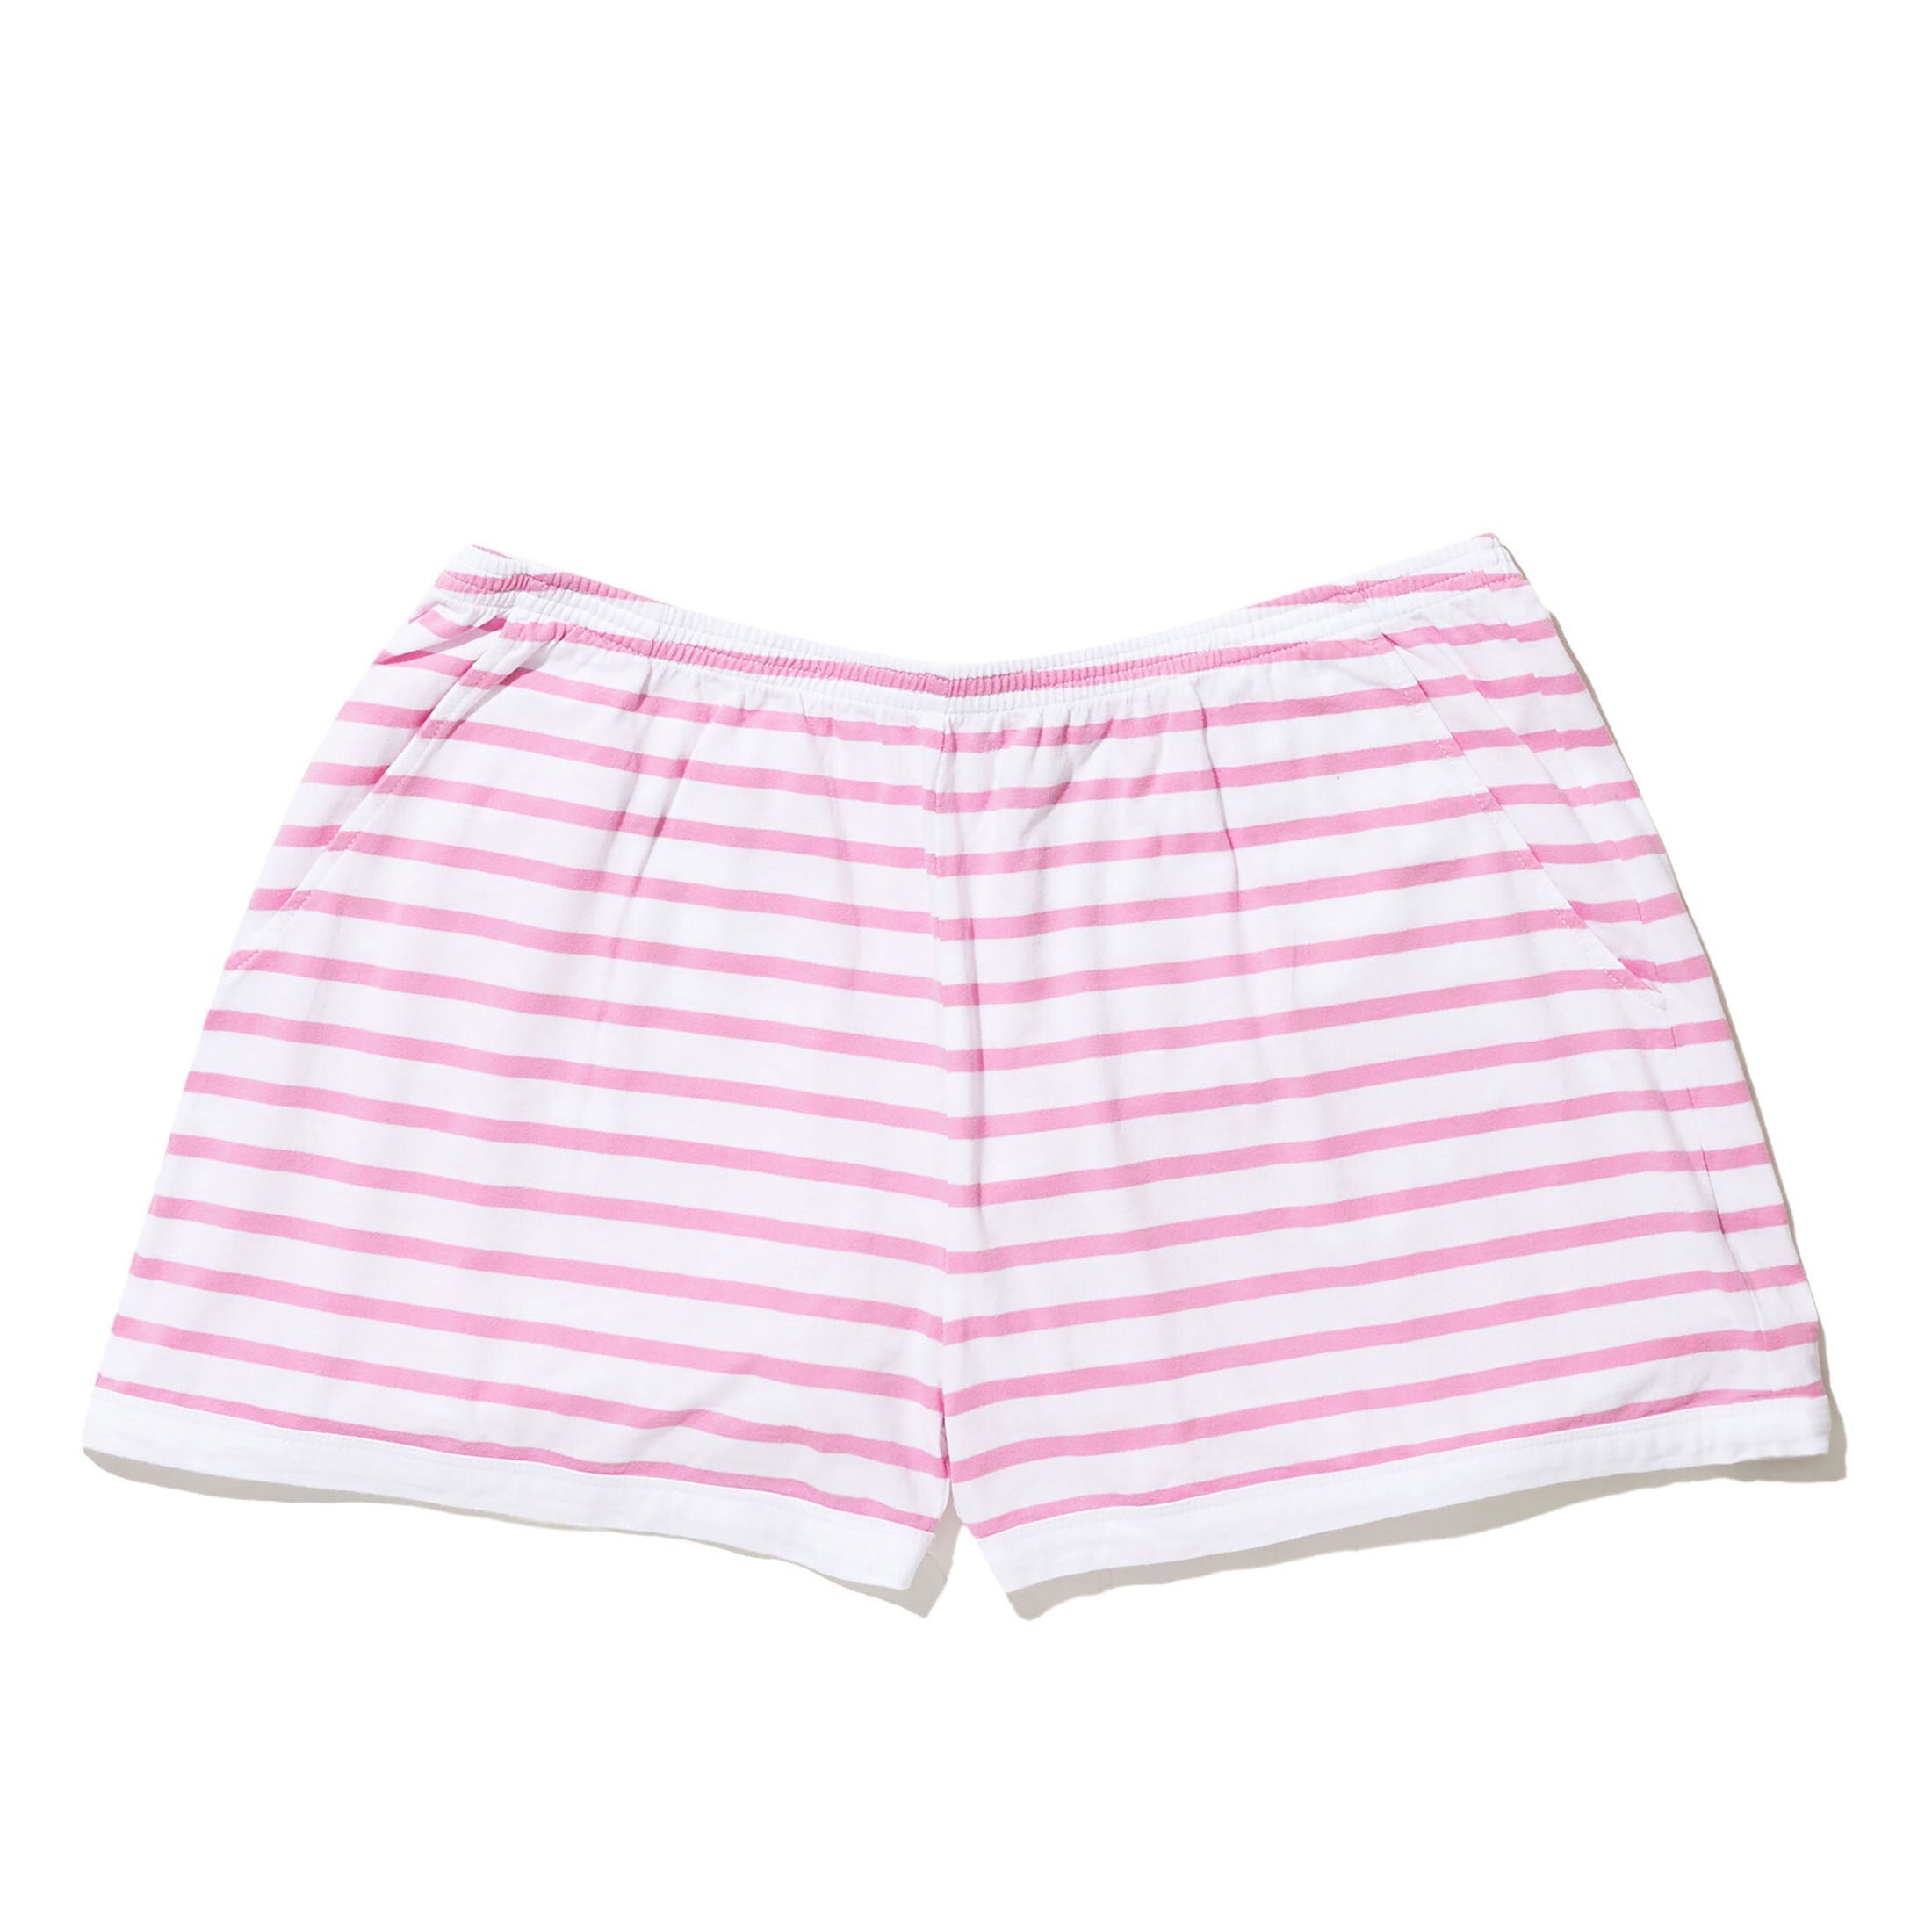 The Short - White/Hot Pink